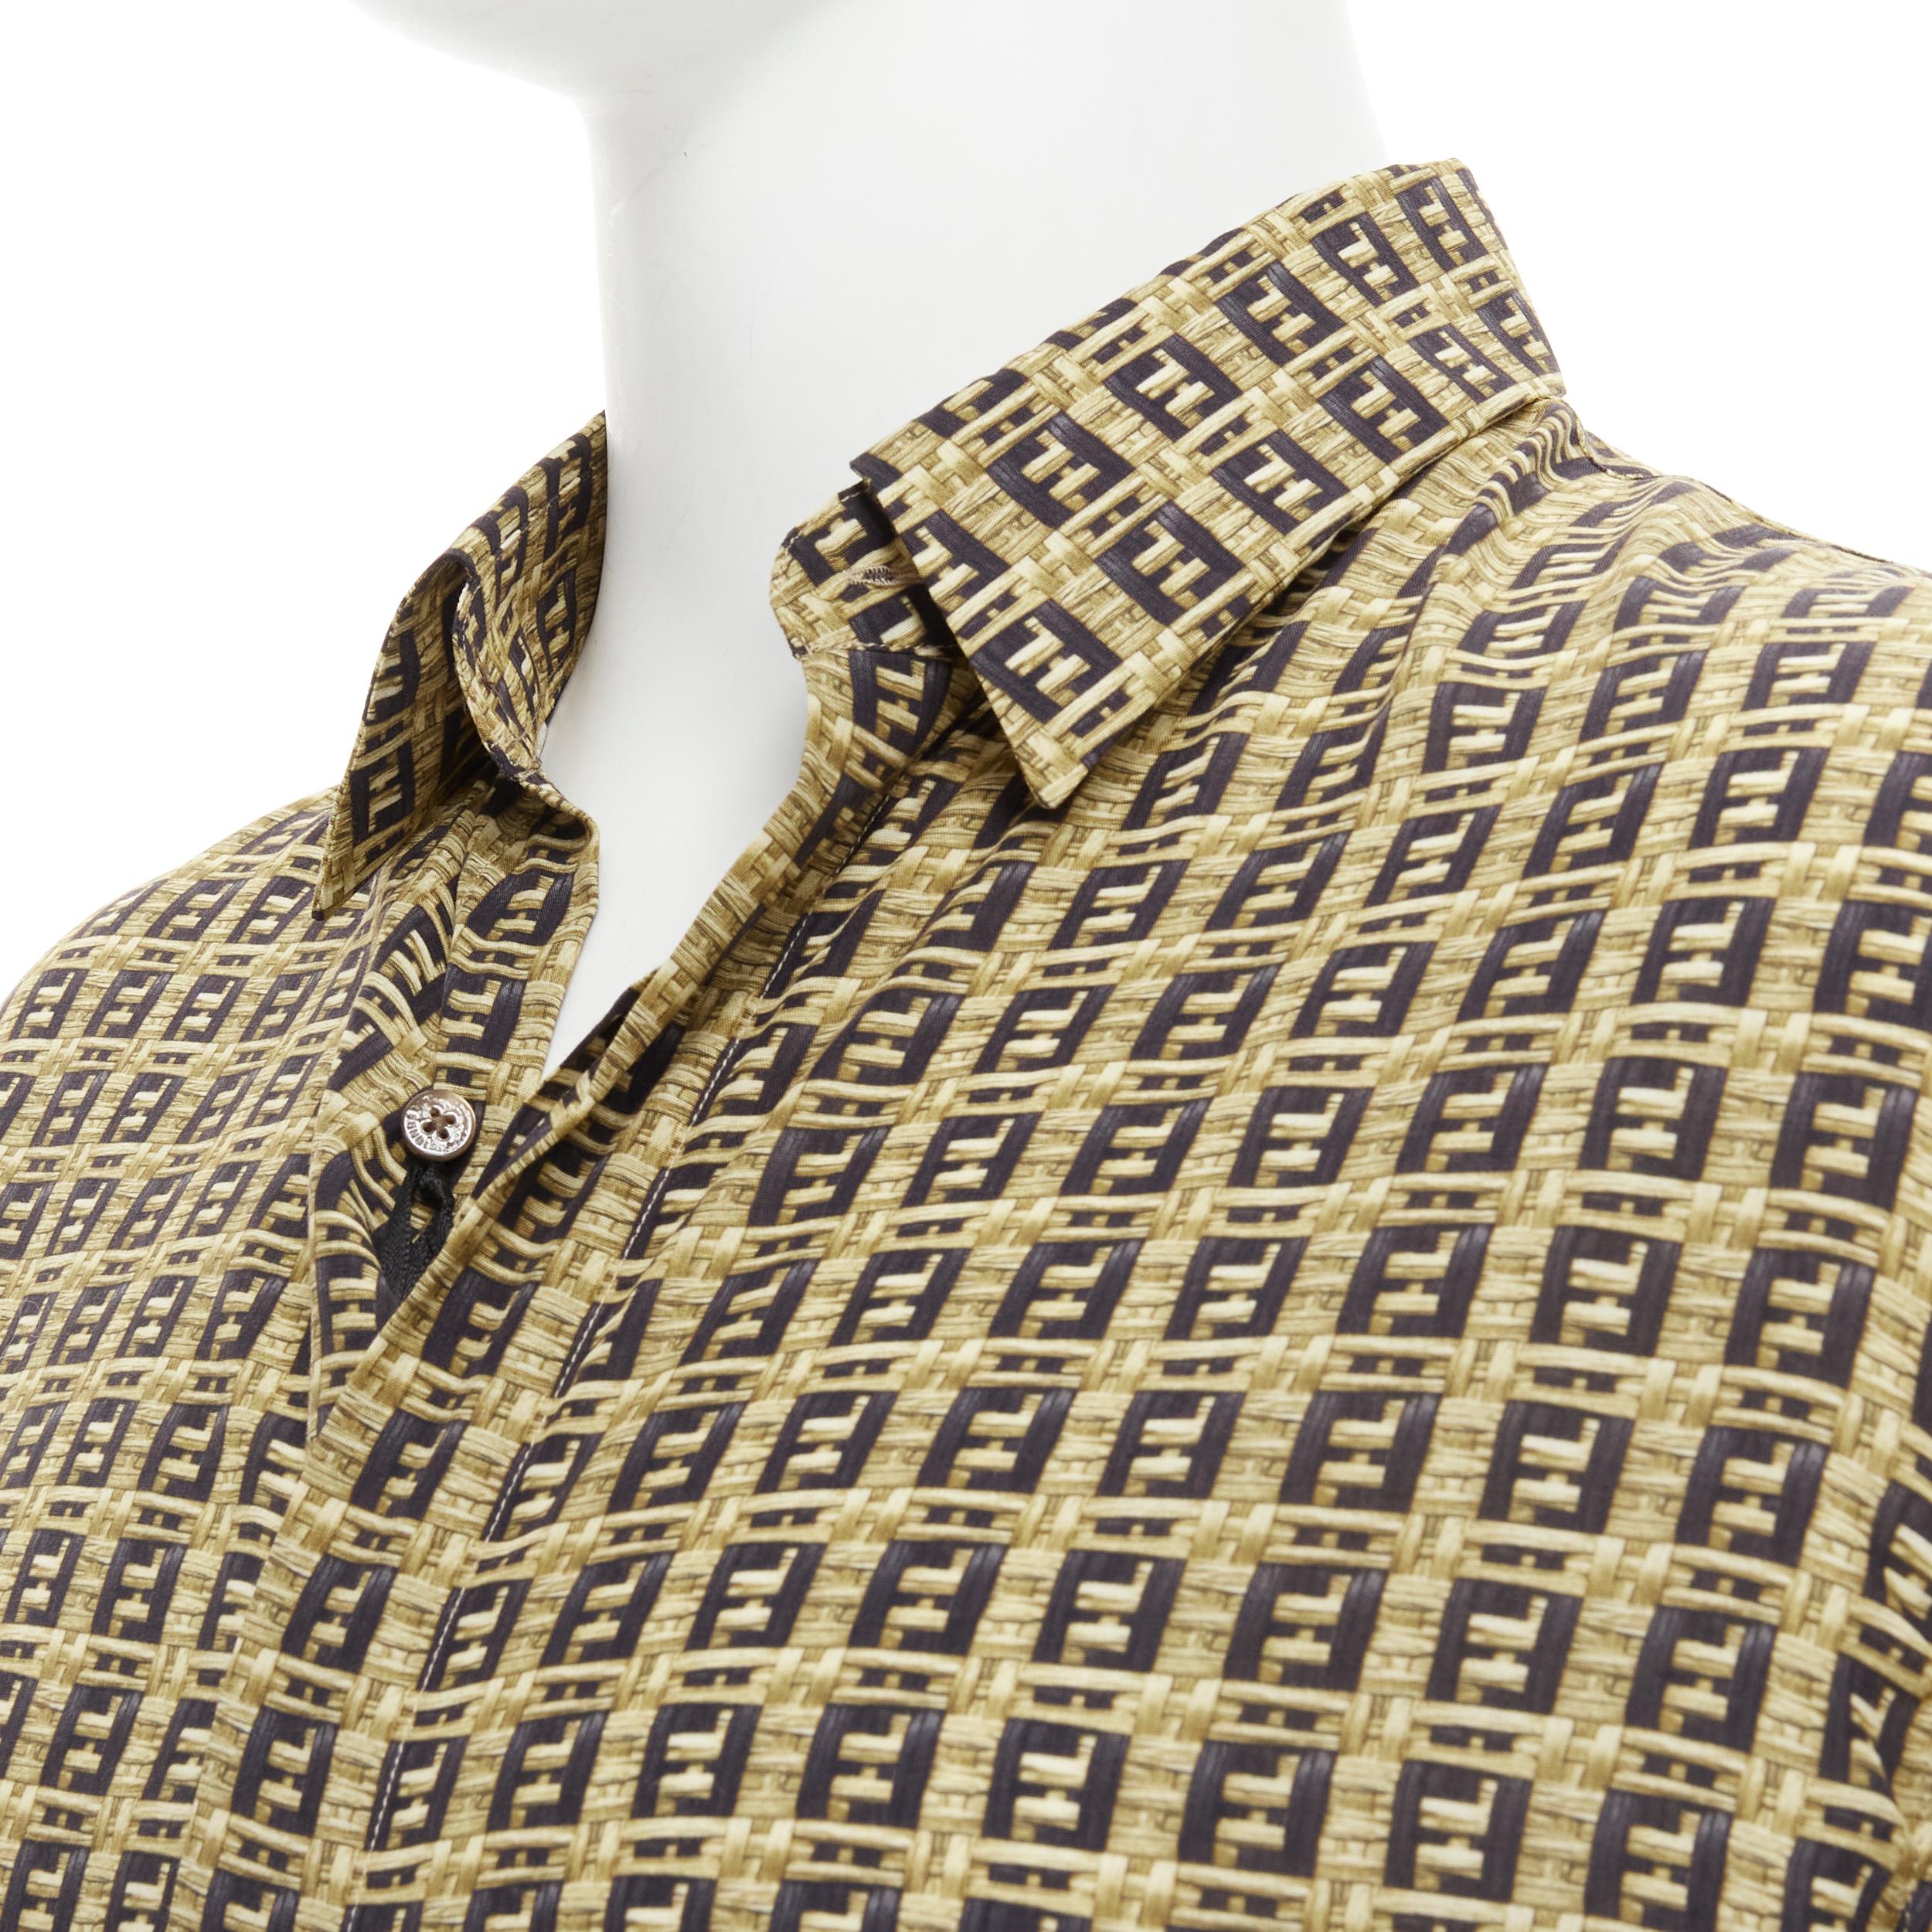 new FENDI Forever Bamboo FF Zucca raffia print bowling summer shirt EU40 L 
Reference: TGAS/C00736 
Brand: Fendi 
Collection: Fendi Forever 
Material: Viscose 
Color: Brown 
Pattern: Abstract 
Closure: Button 
Estimated Retail Price: US $1060 
Made